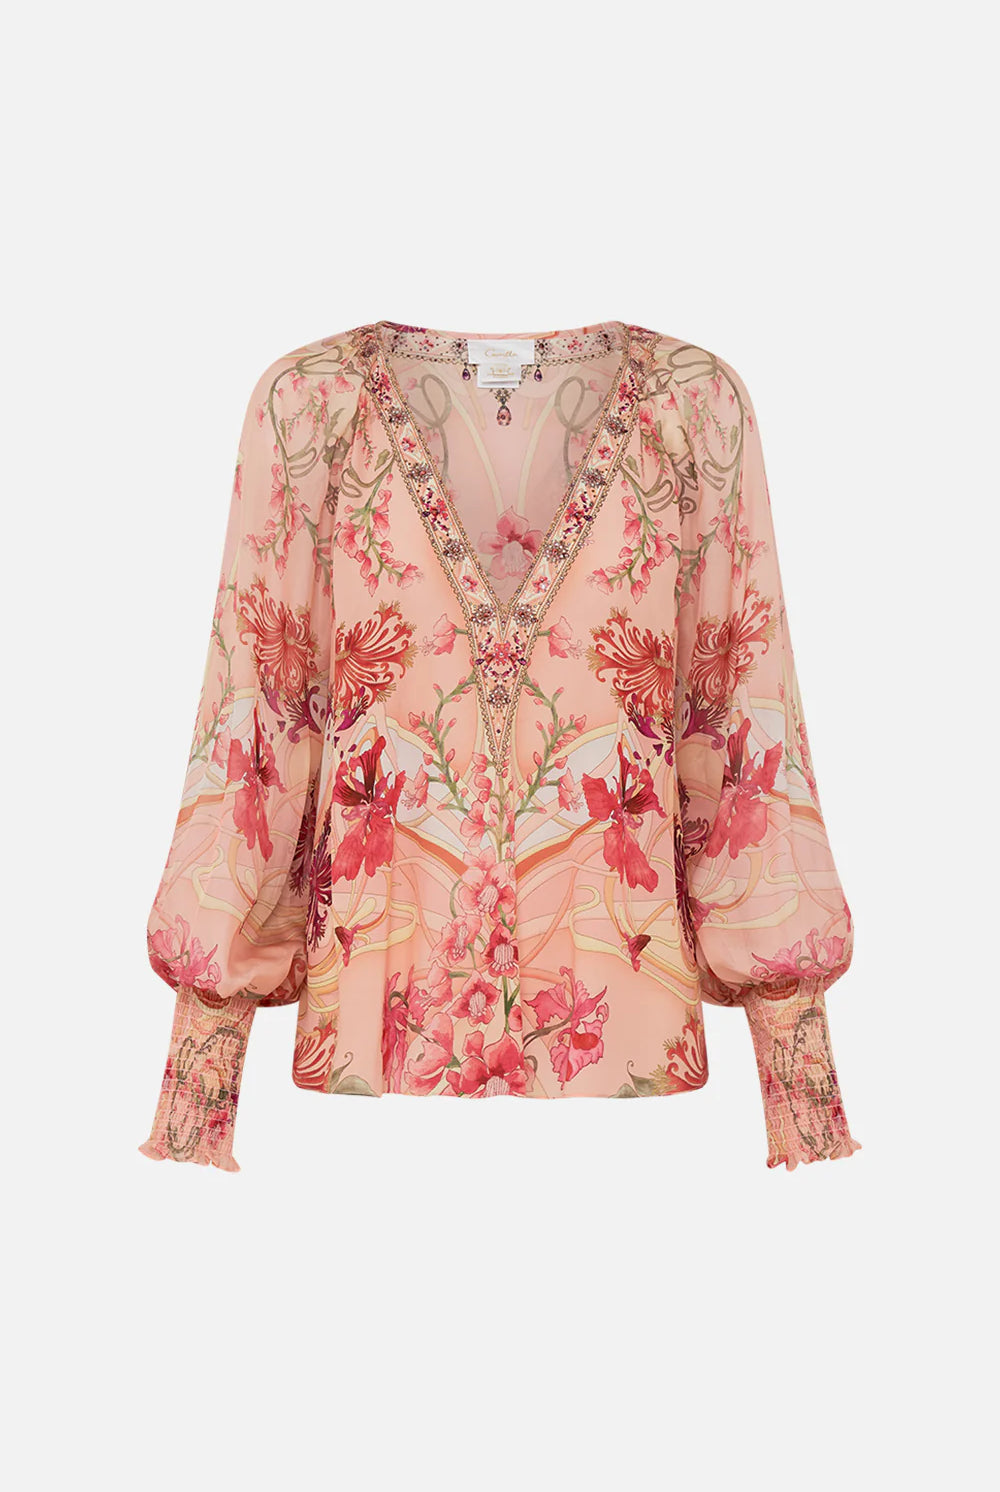 CAMILLA - Shirred Cuff Blouse Blossoms and Brushstrokes - Magpie Style